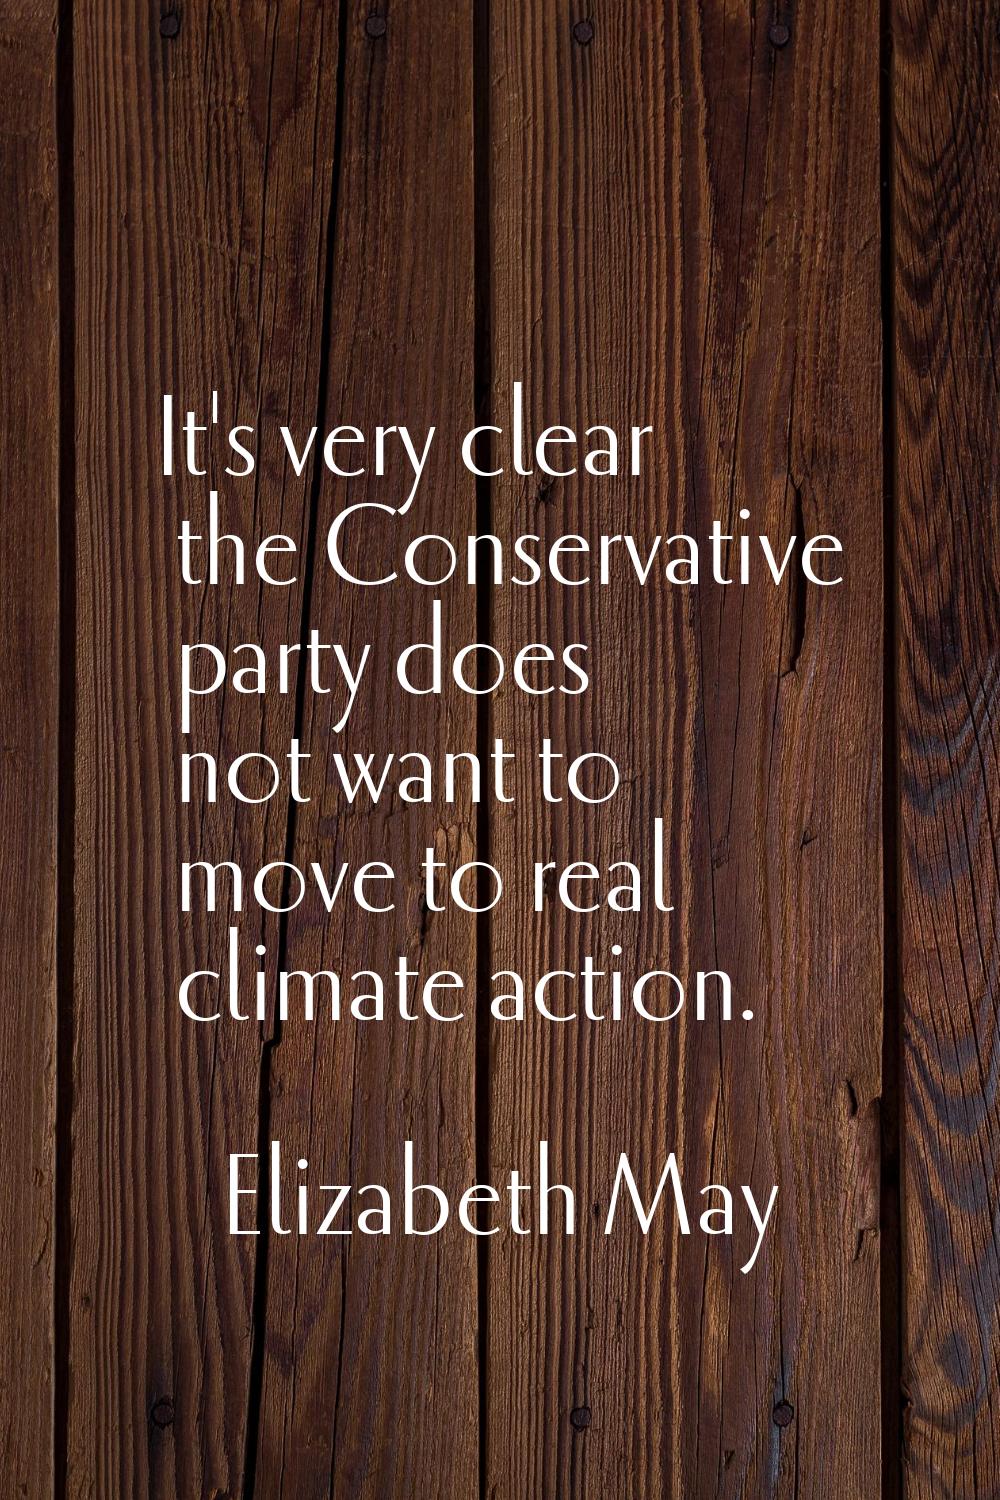 It's very clear the Conservative party does not want to move to real climate action.